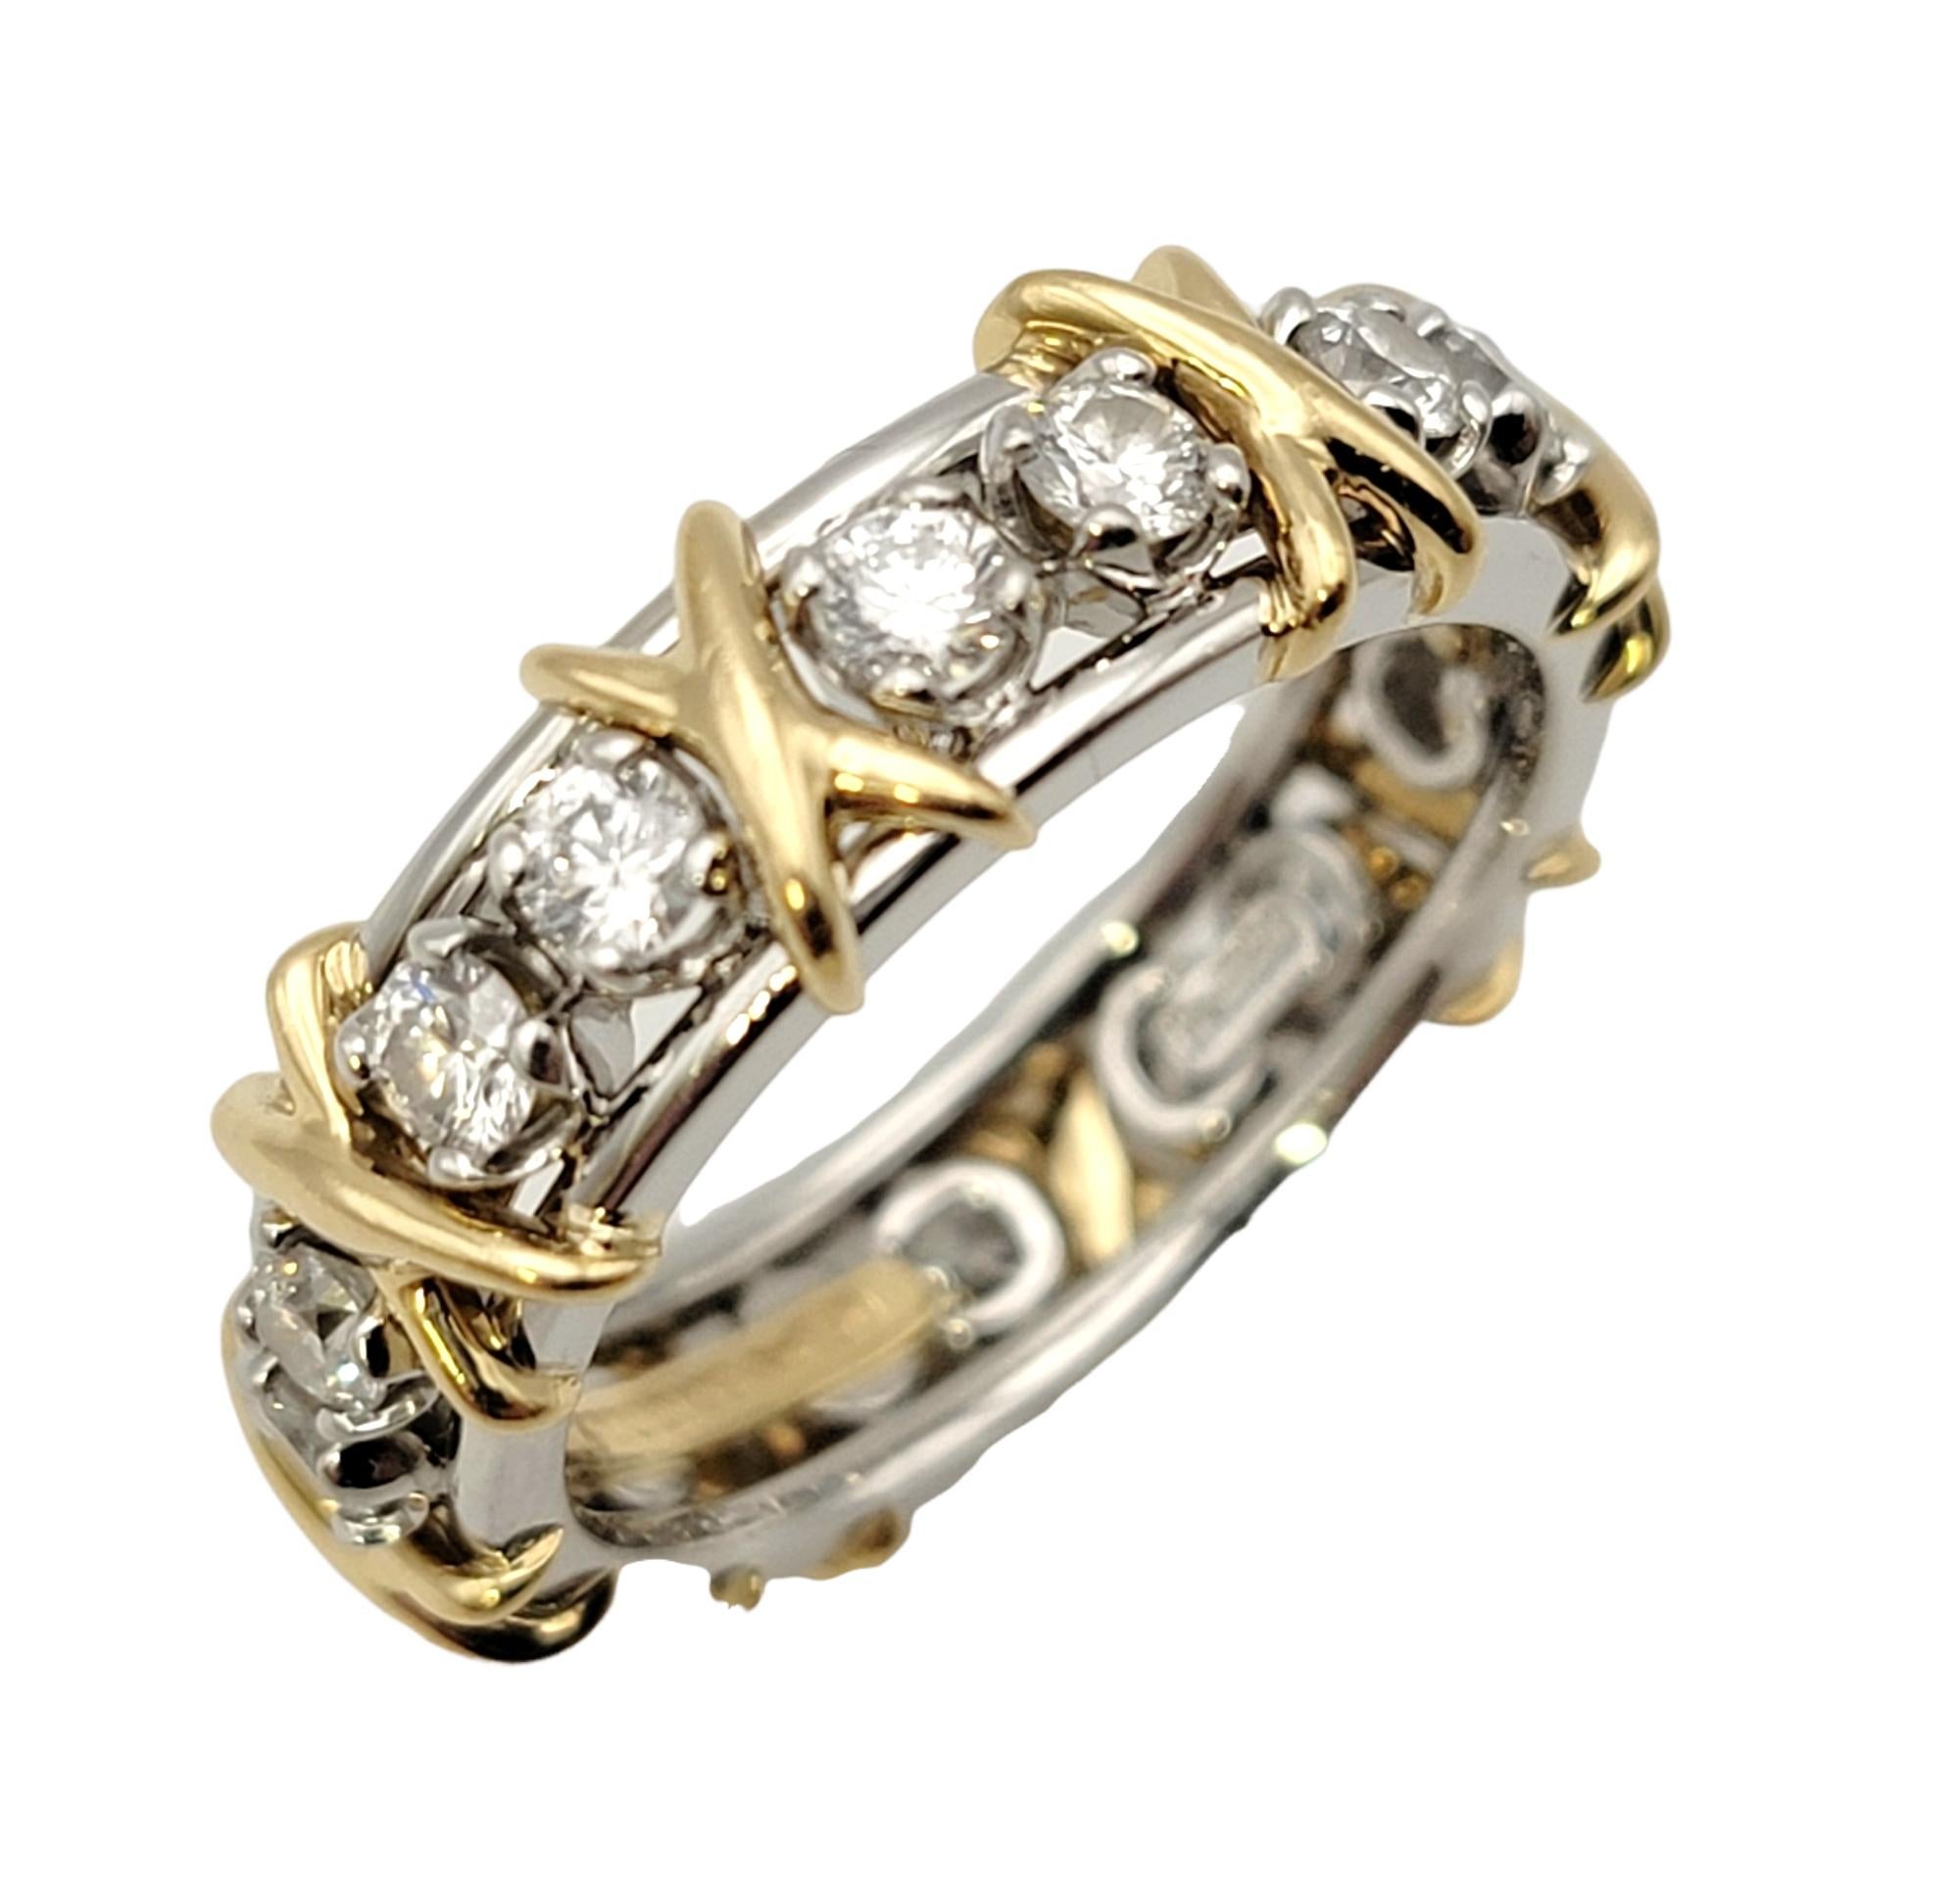 Ring Size: 8

Absolutely exquisite Sixteen Stone diamond eternity band ring by Jean Schlumberger for Tiffany & Co. This gorgeous piece boasts a sophisticated elegance with a contemporary yet classic design. The dazzling Tiffany & Co. diamonds